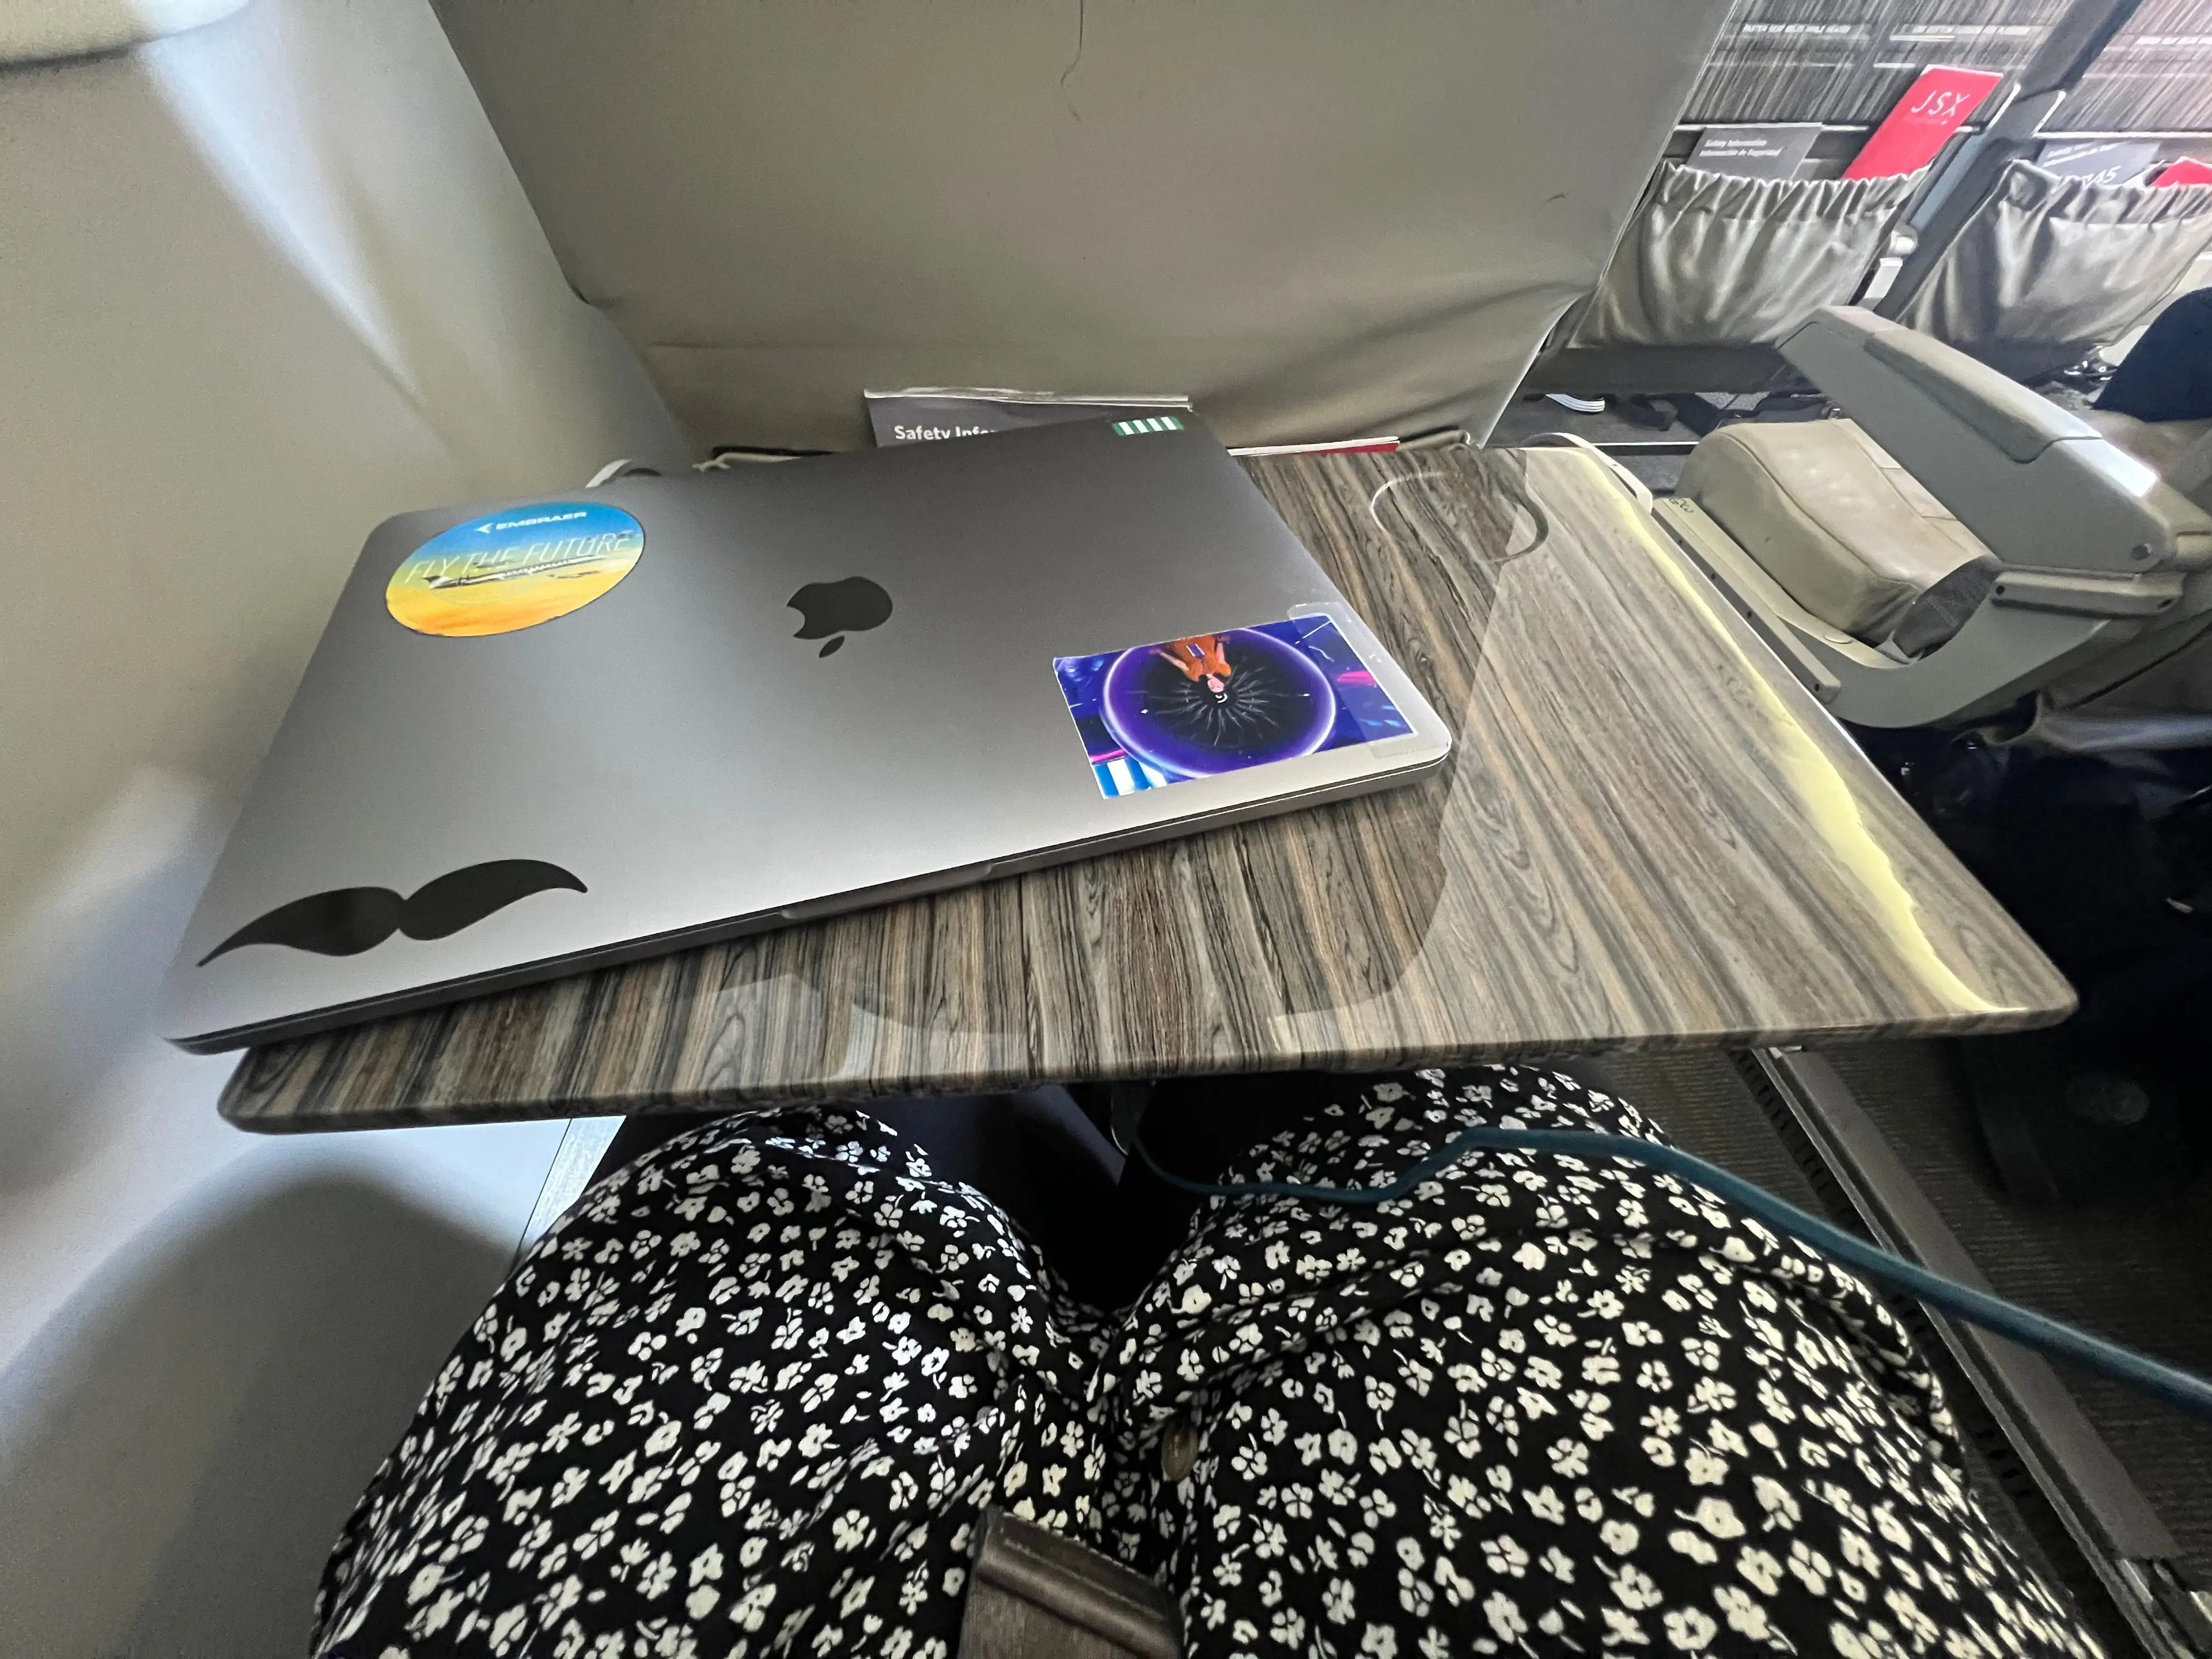 The author's laptop placed on the top of the tray table which still has room to hold a drink.